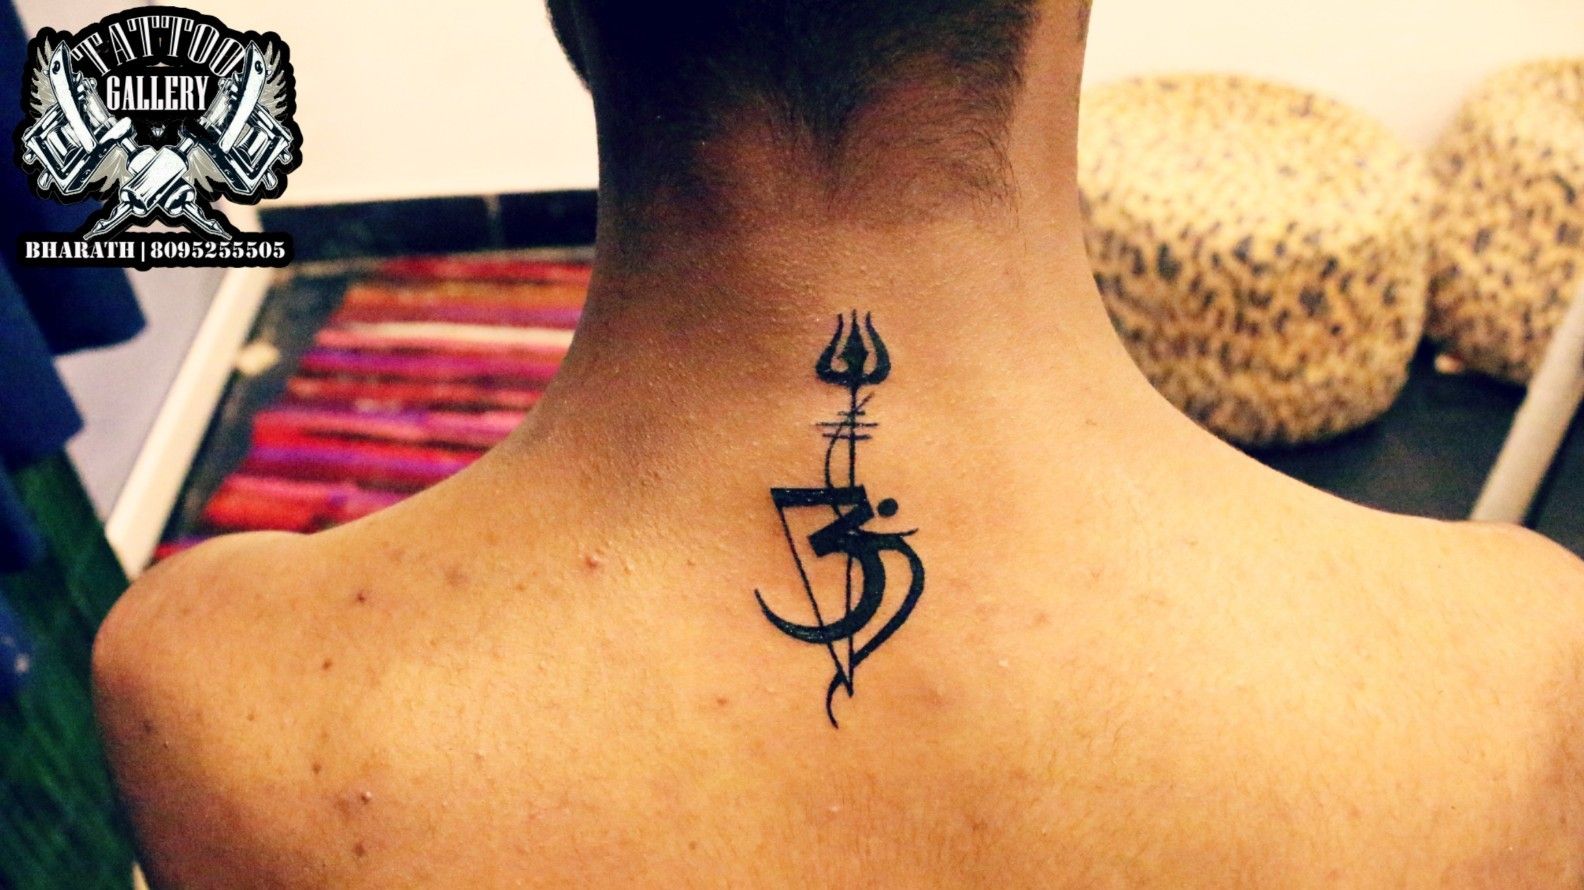 Allahabad Tattoo spiritualism the in thing ahead of Shrawan  Allahabad  News  Times of India